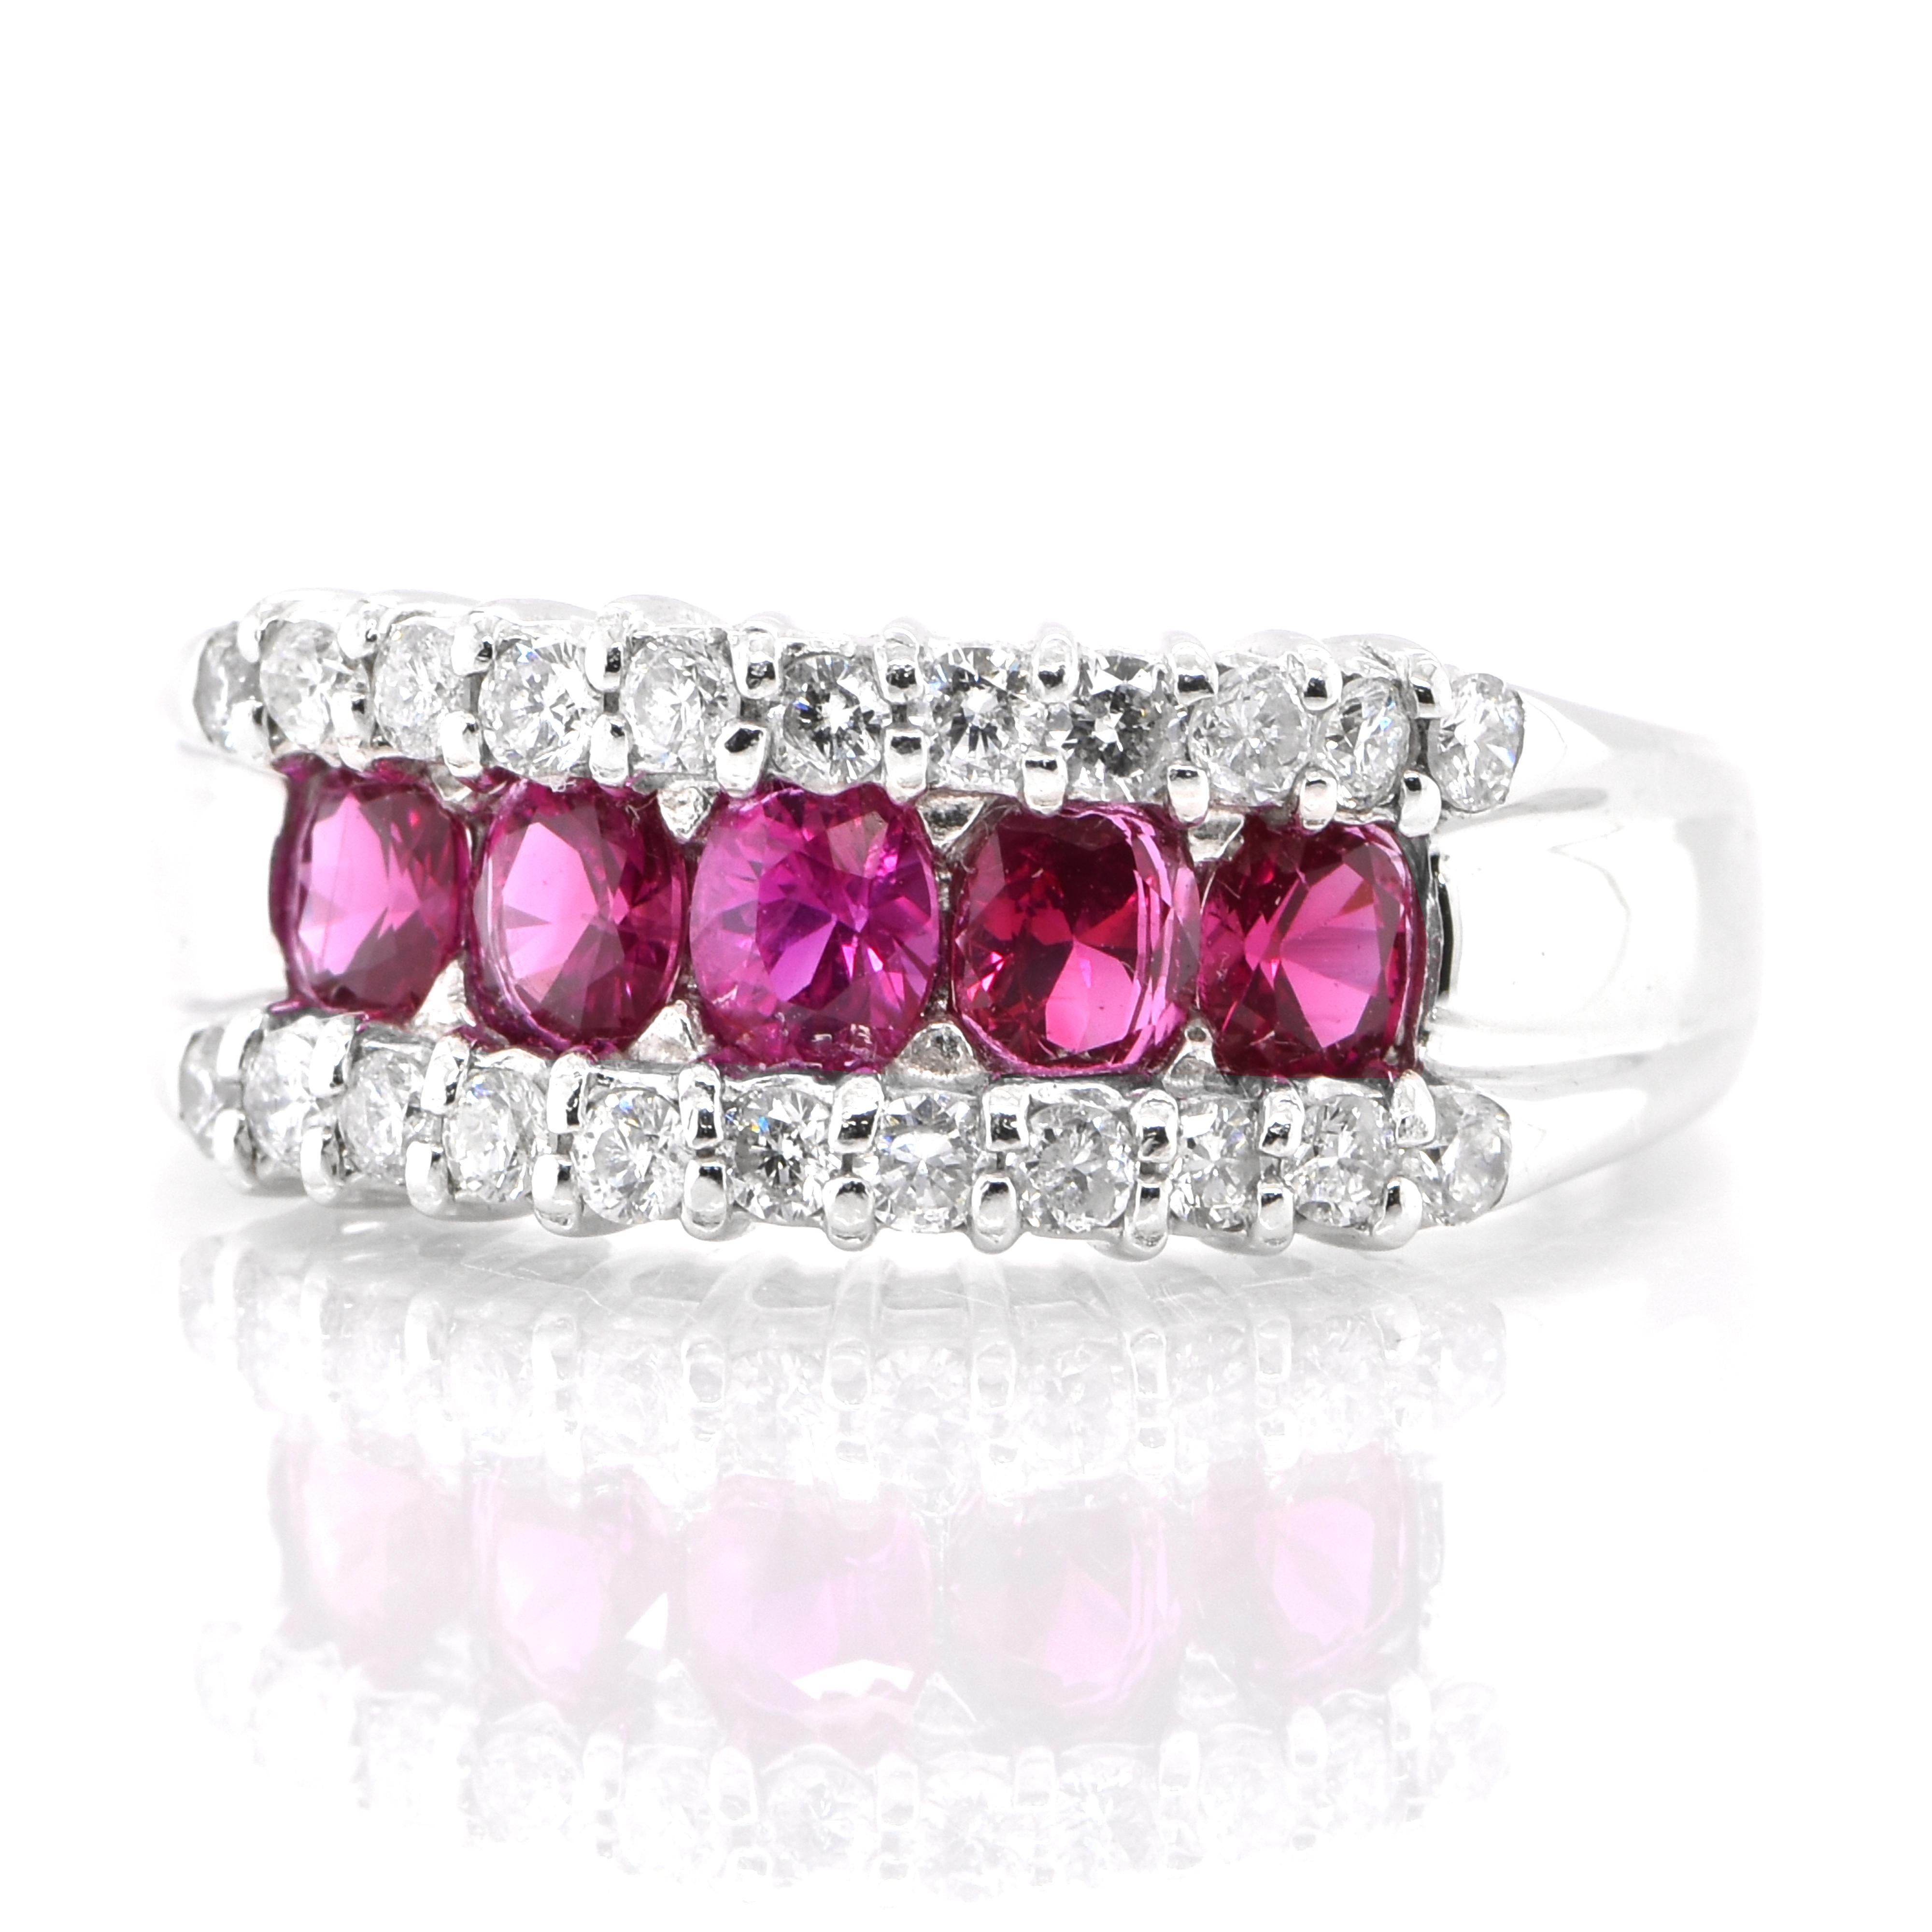 A beautiful band ring set in Platinum featuring 1.00 Carats Natural Rubies and 0.45 Carat Diamonds. Rubies are referred to as 